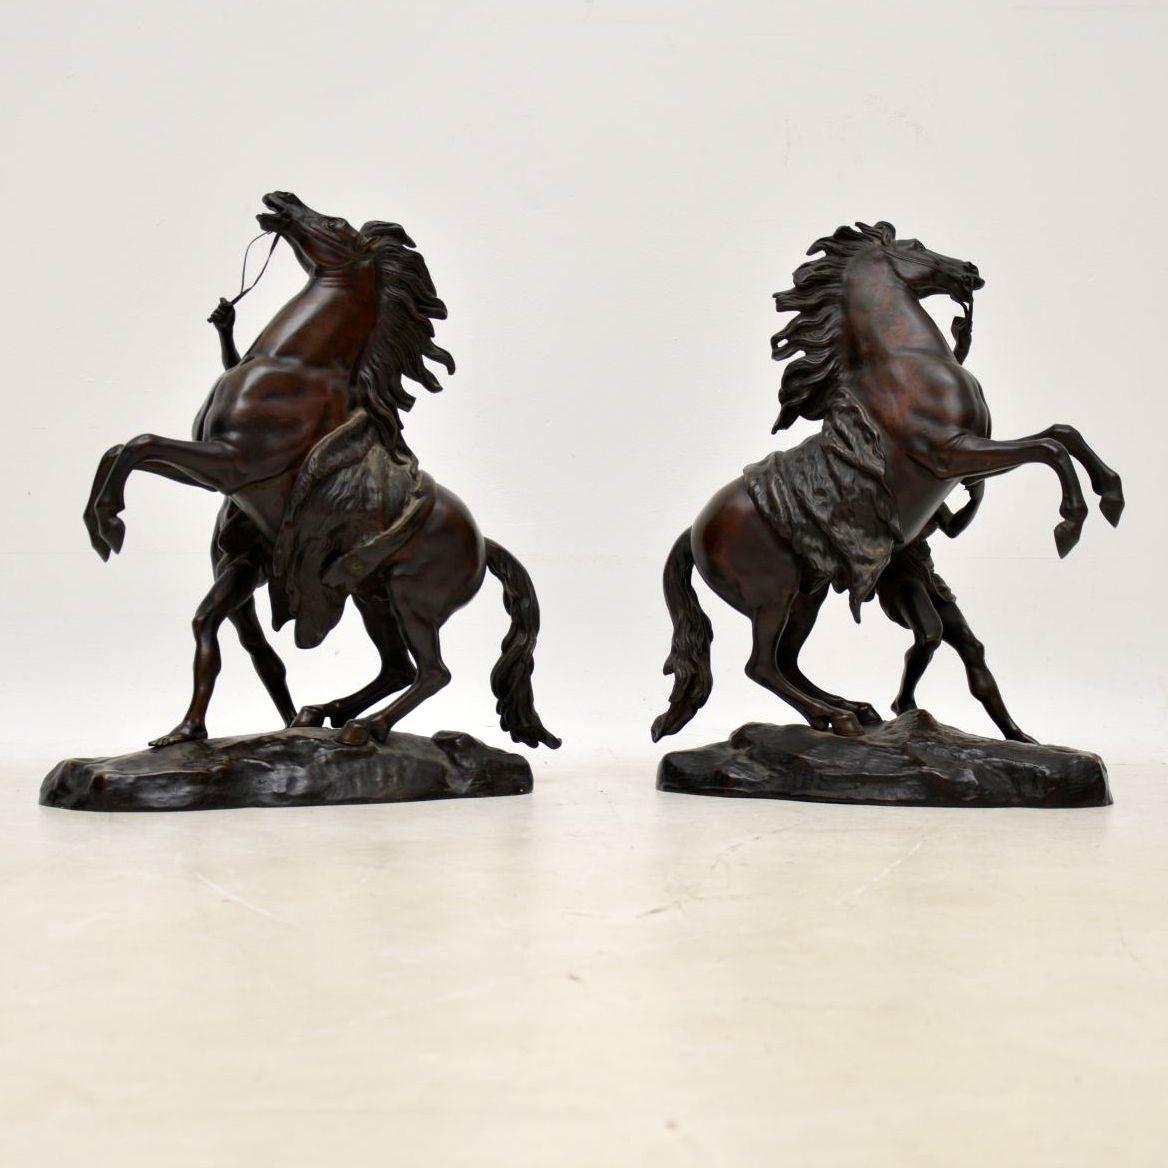 Large pair of superb quality antique French 19th century bronze ‘Marley’ horses after Guillaume Coustou dating from around the 1860s period. Please enlarge all the images to appreciate the quality of the casting, the fine details and the wonderful